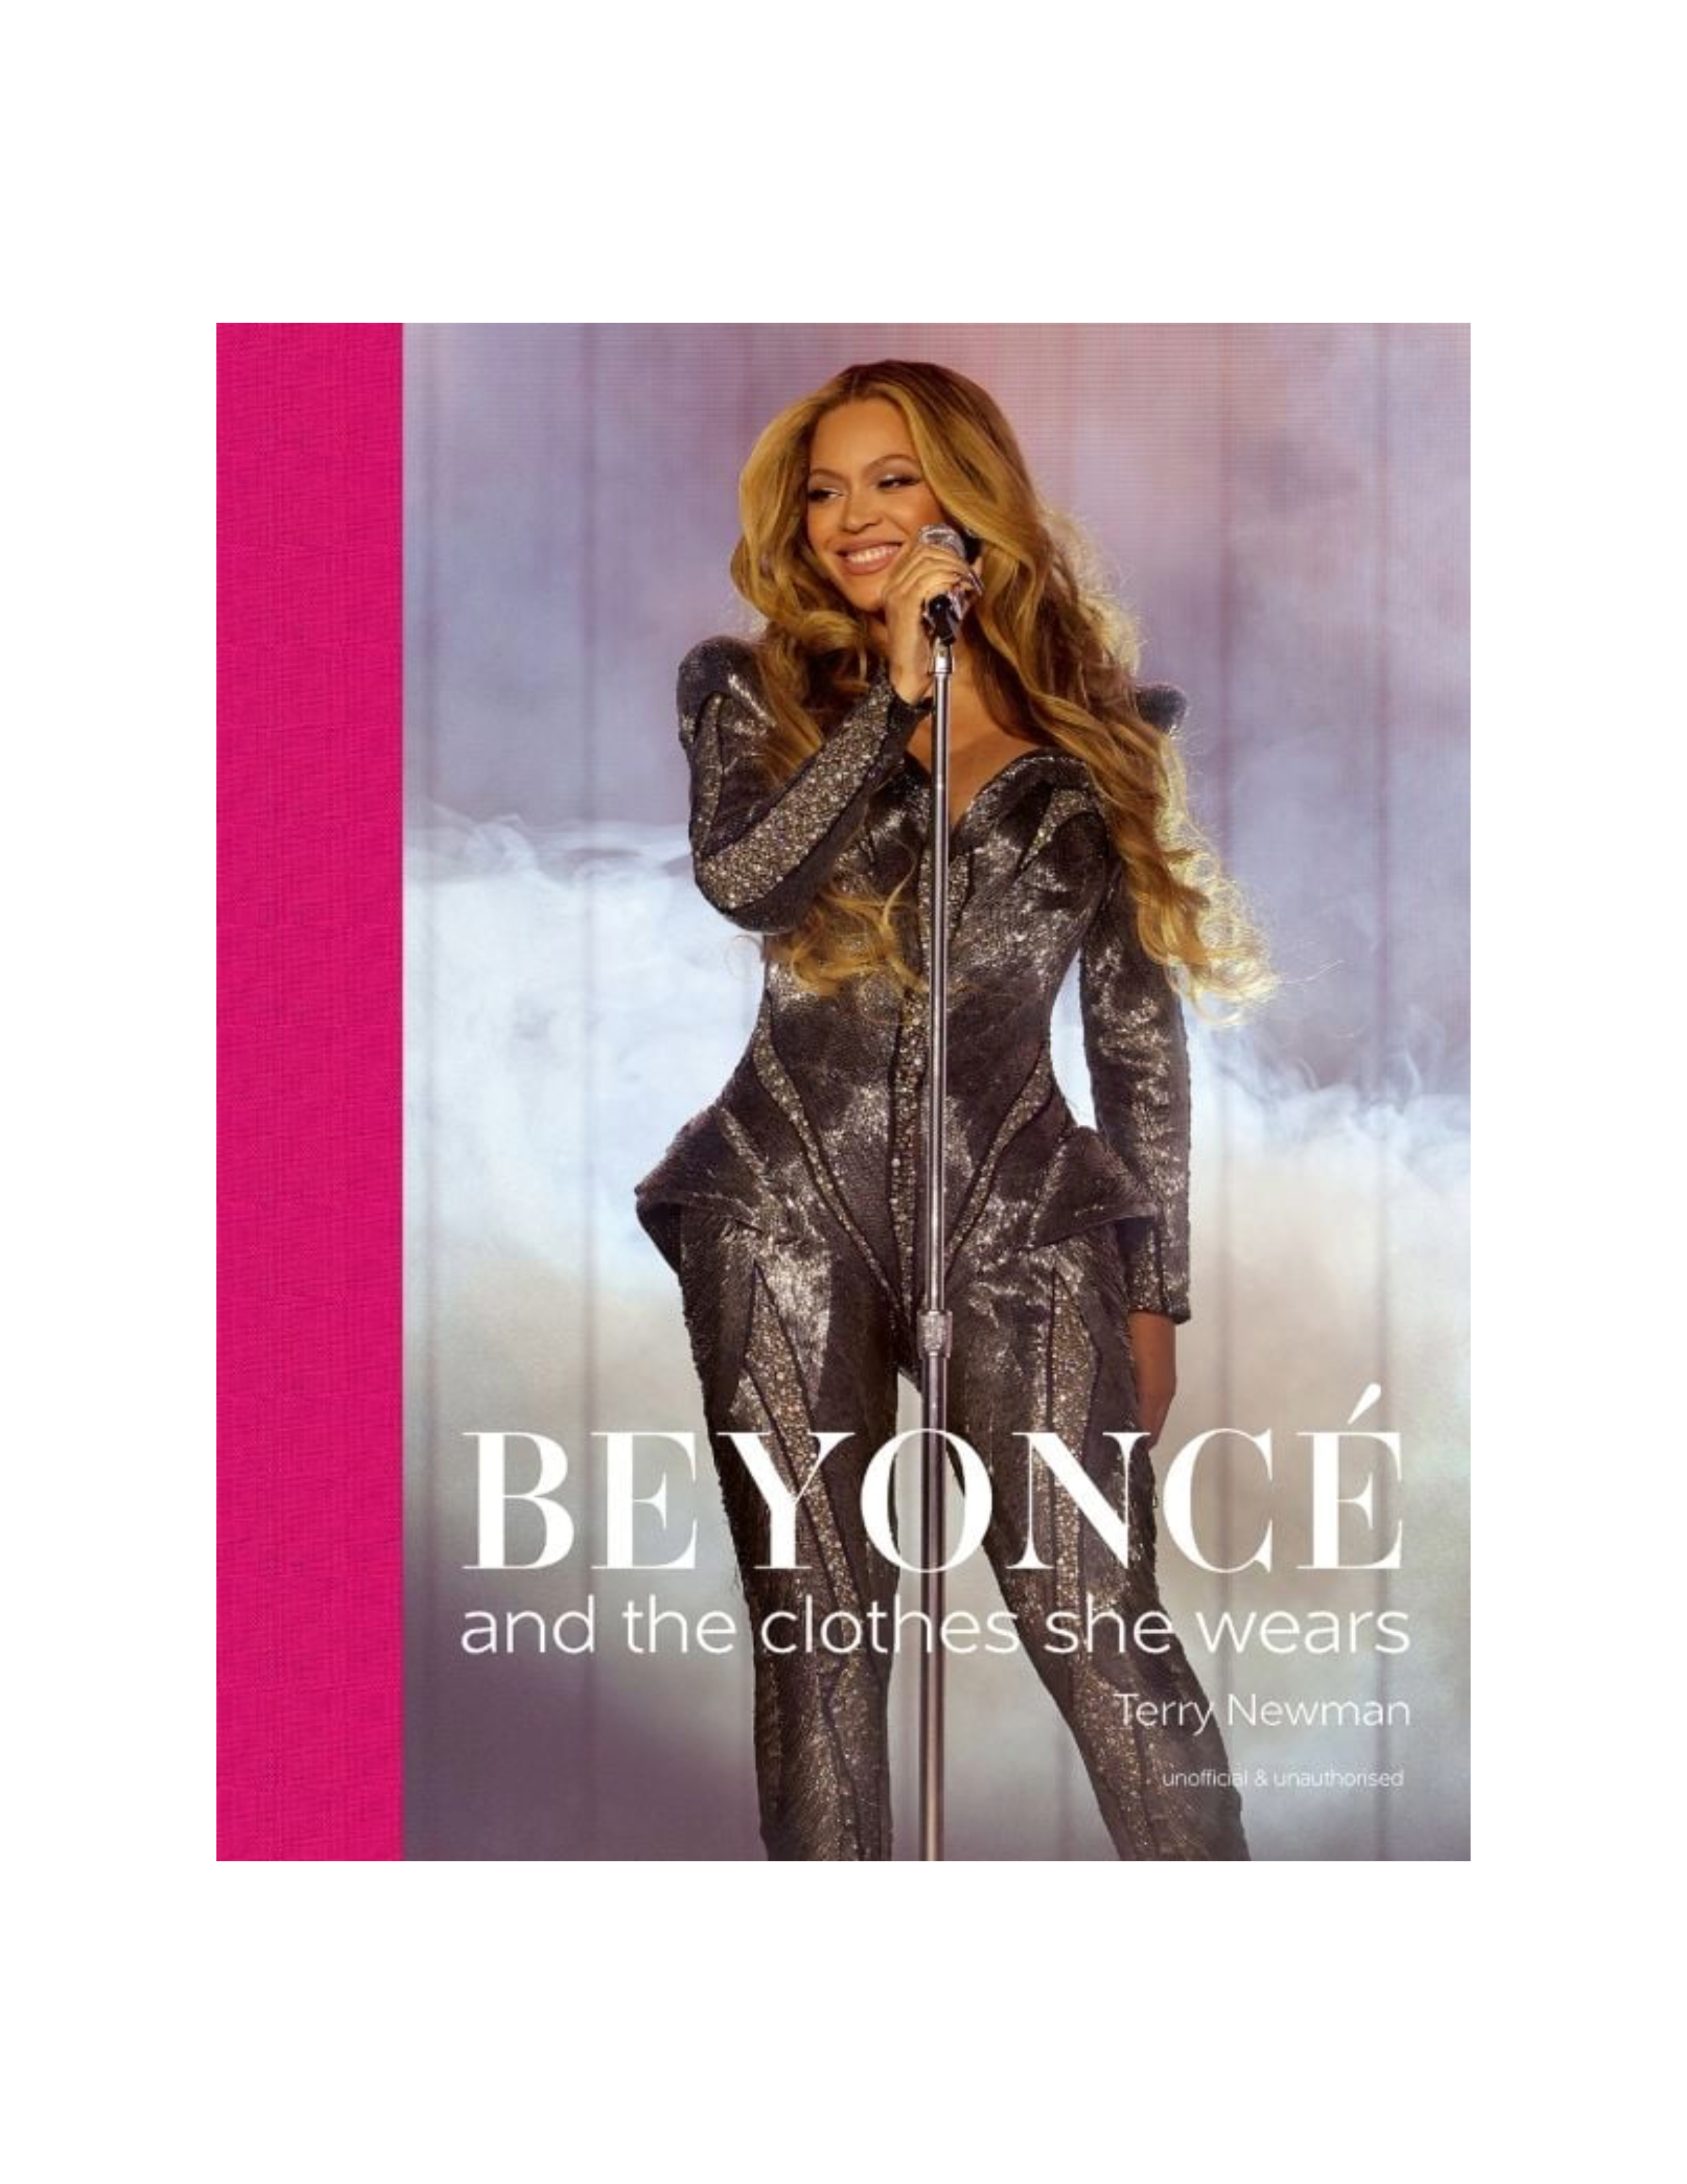 Beyonce: And the Clothes She Wears (Copy)